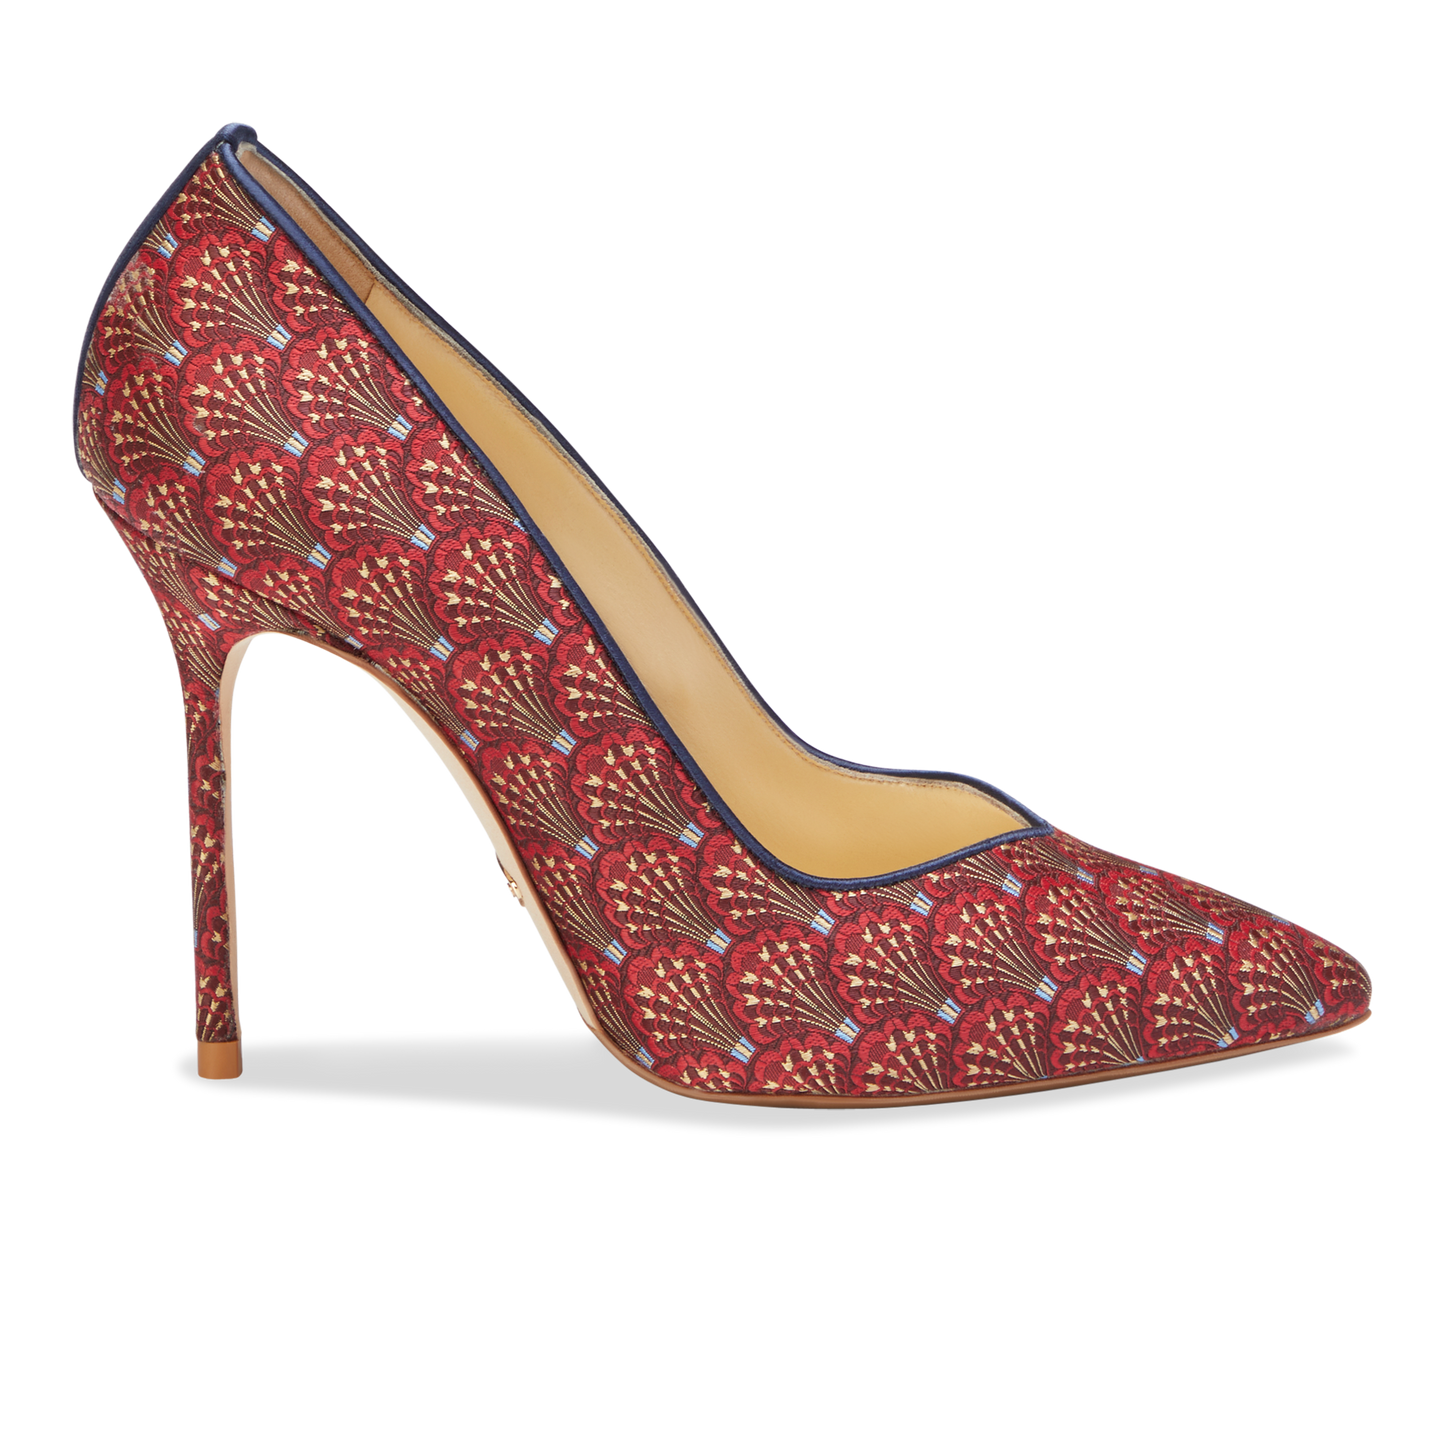 Perfect Pump 100 in Red Vienna Jacquard